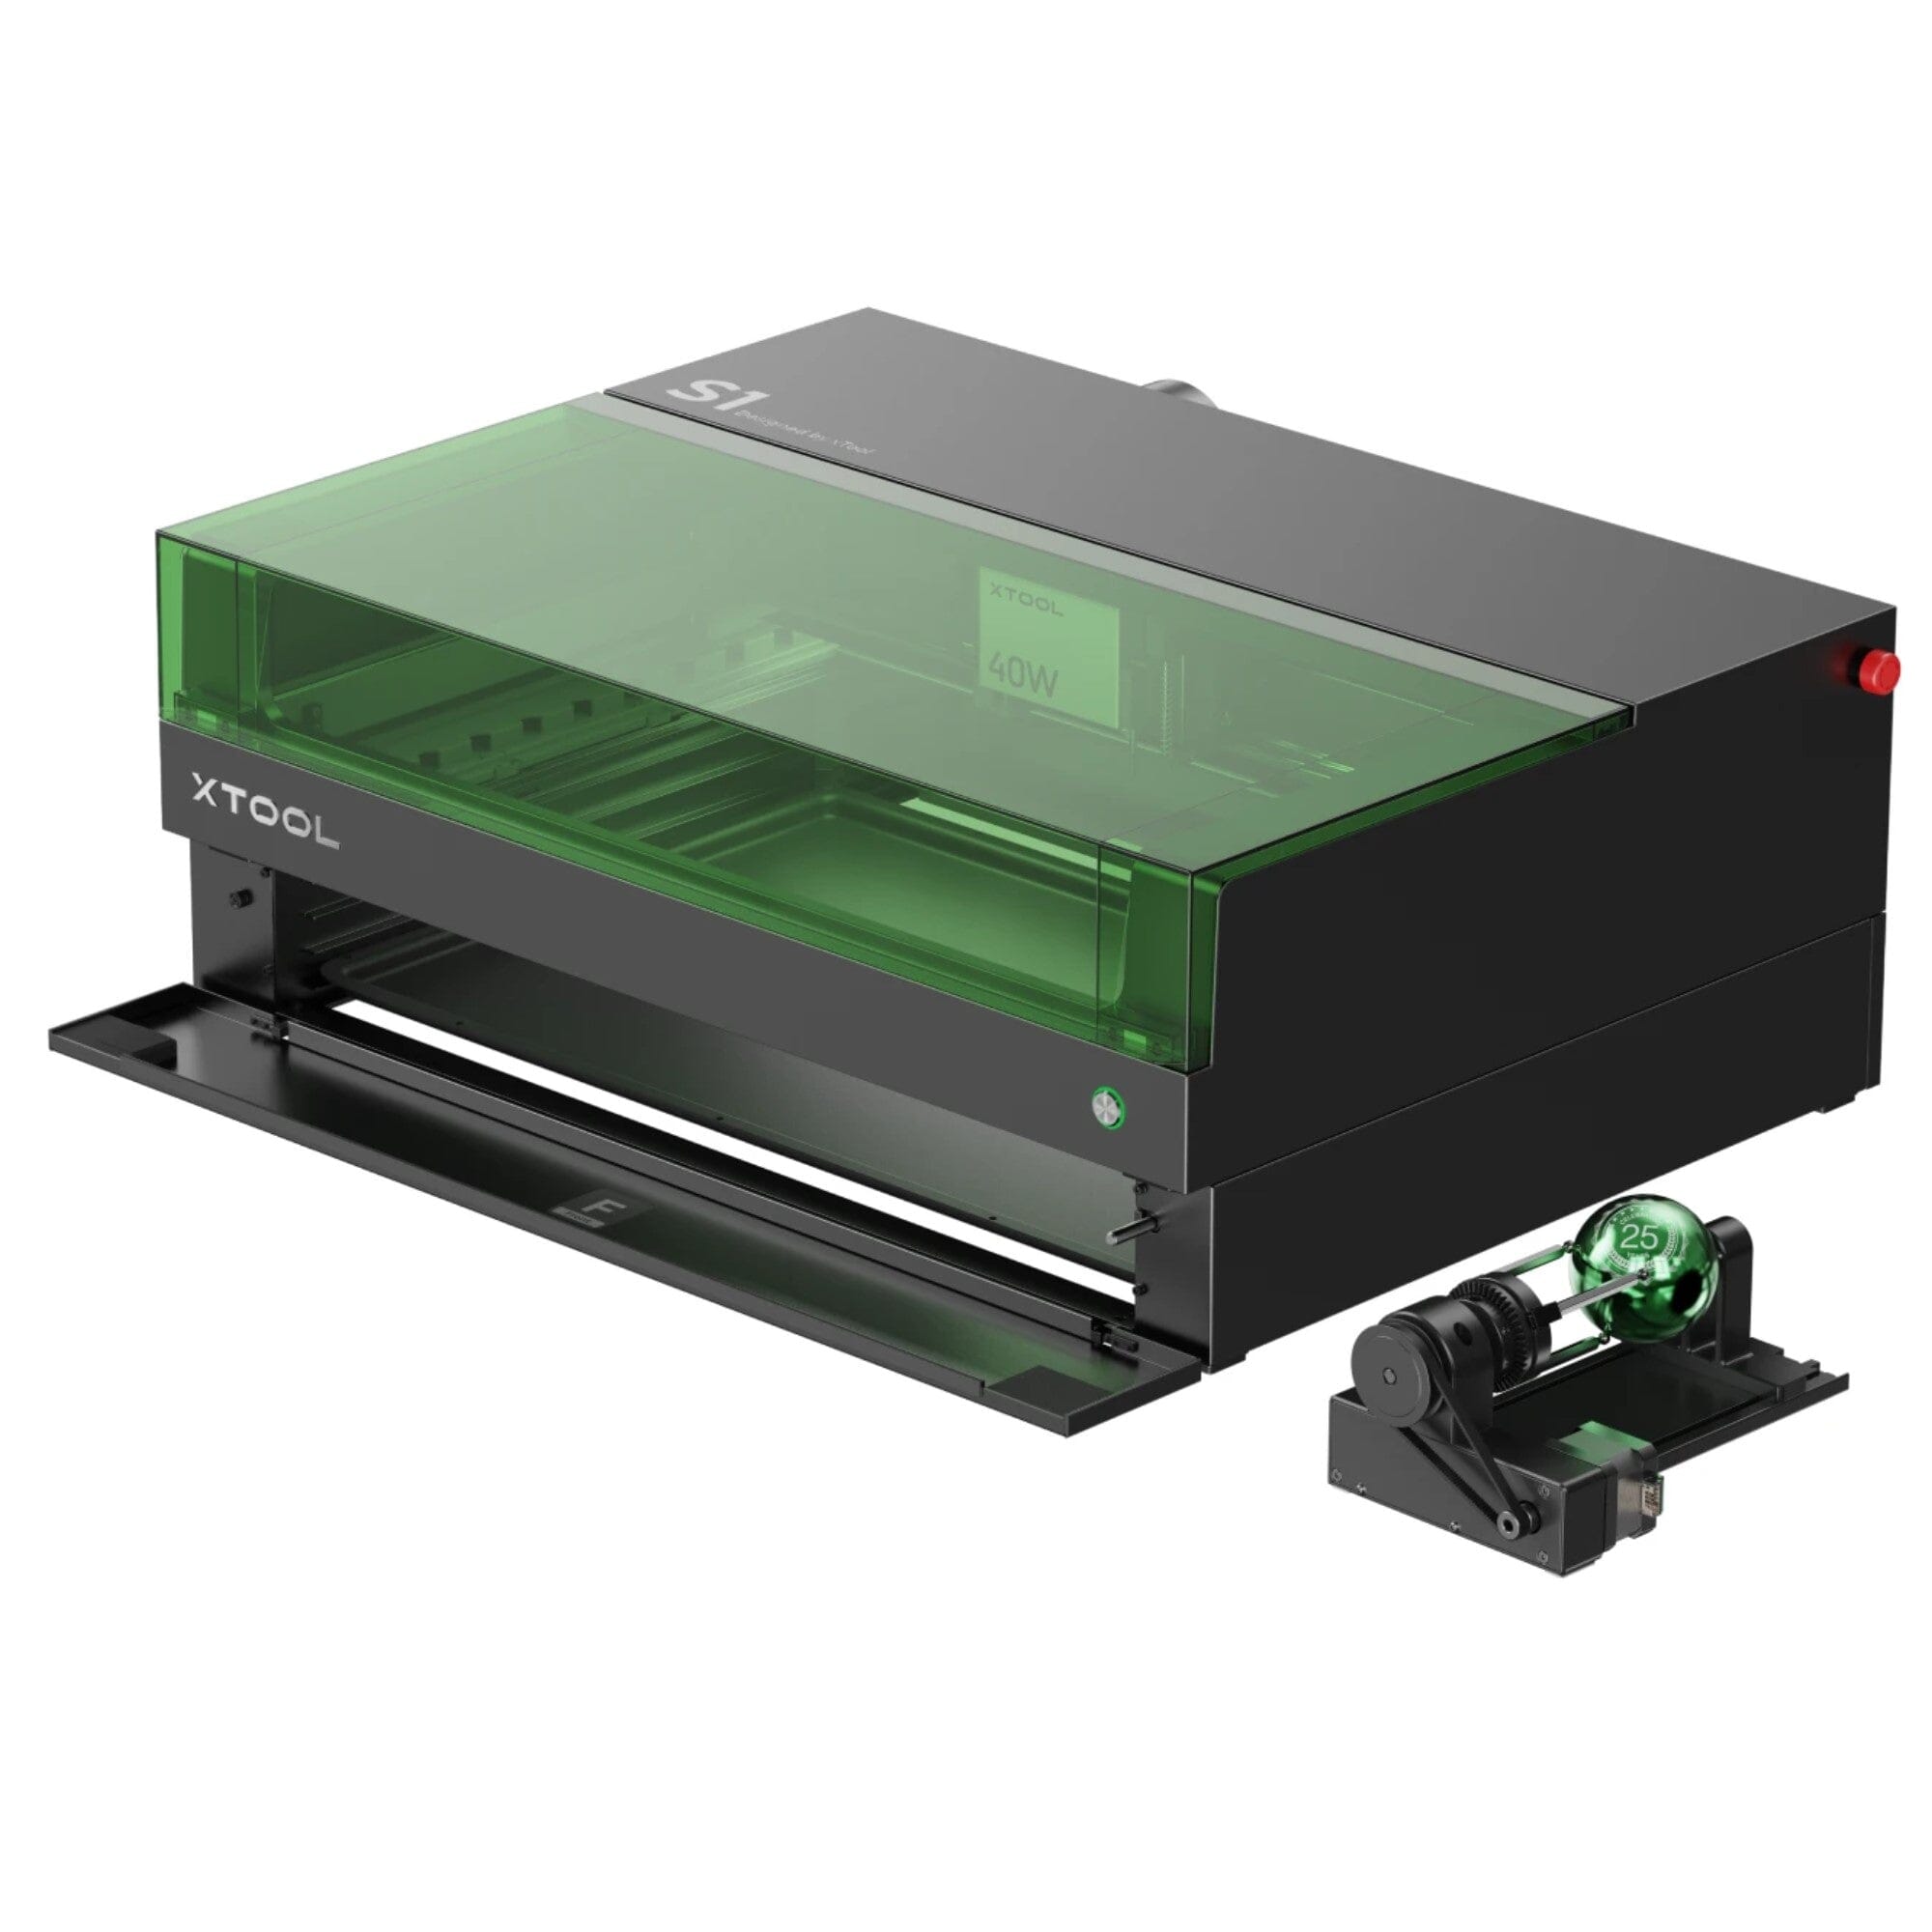 xTool S1 Enclosed Diode Laser Cutter– Ultimate 3D Printing Store